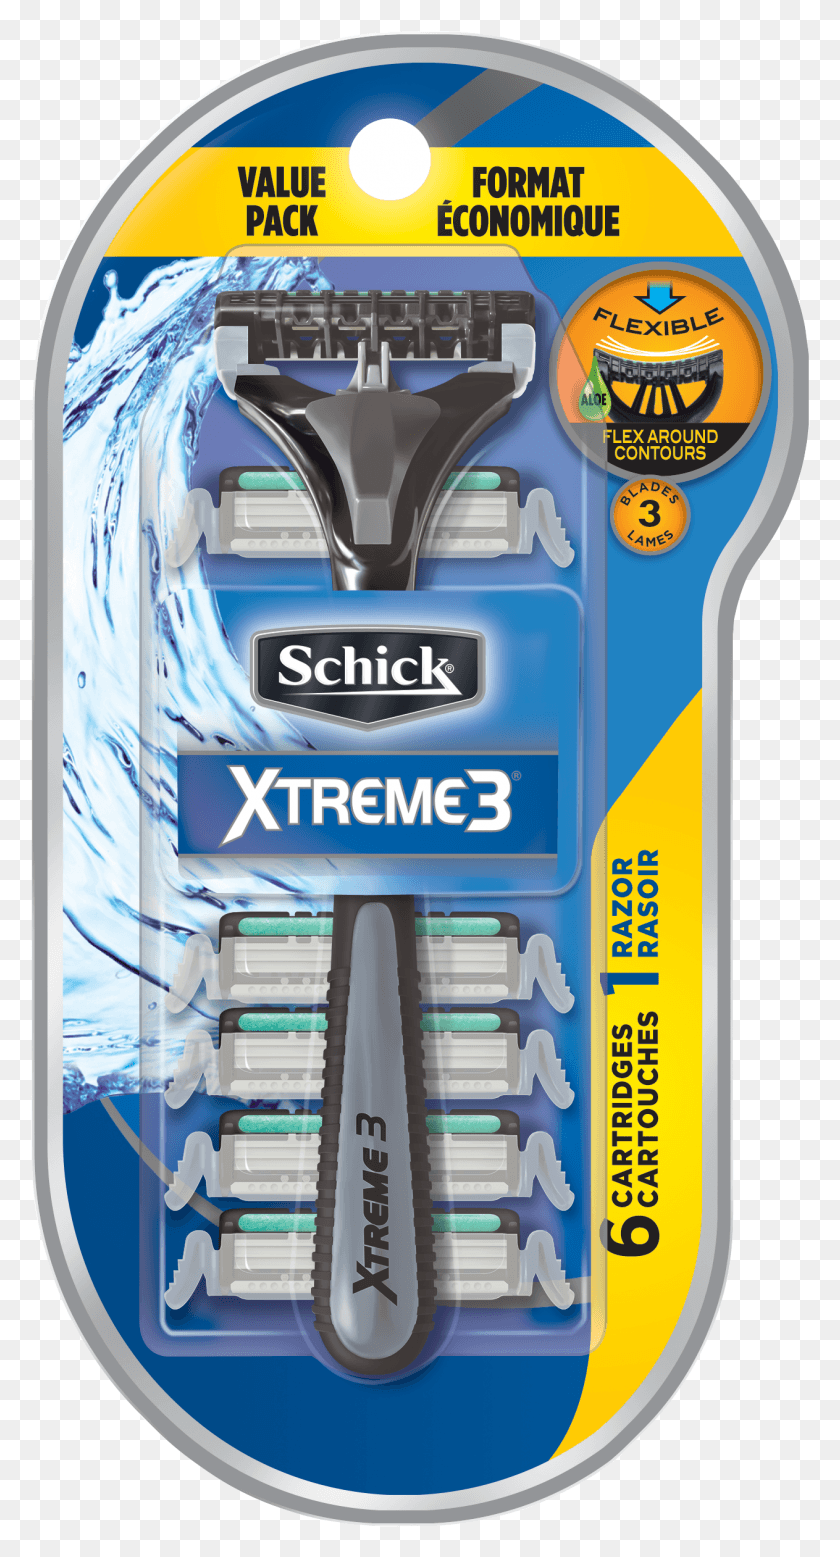 1263x2425 Schick Xtreme 3 Men39s 6 In 1 Disposable Razor System Schick Xtreme 3 Razor Value Pack, Pez Dispenser, Cosmetics, Weapon HD PNG Download